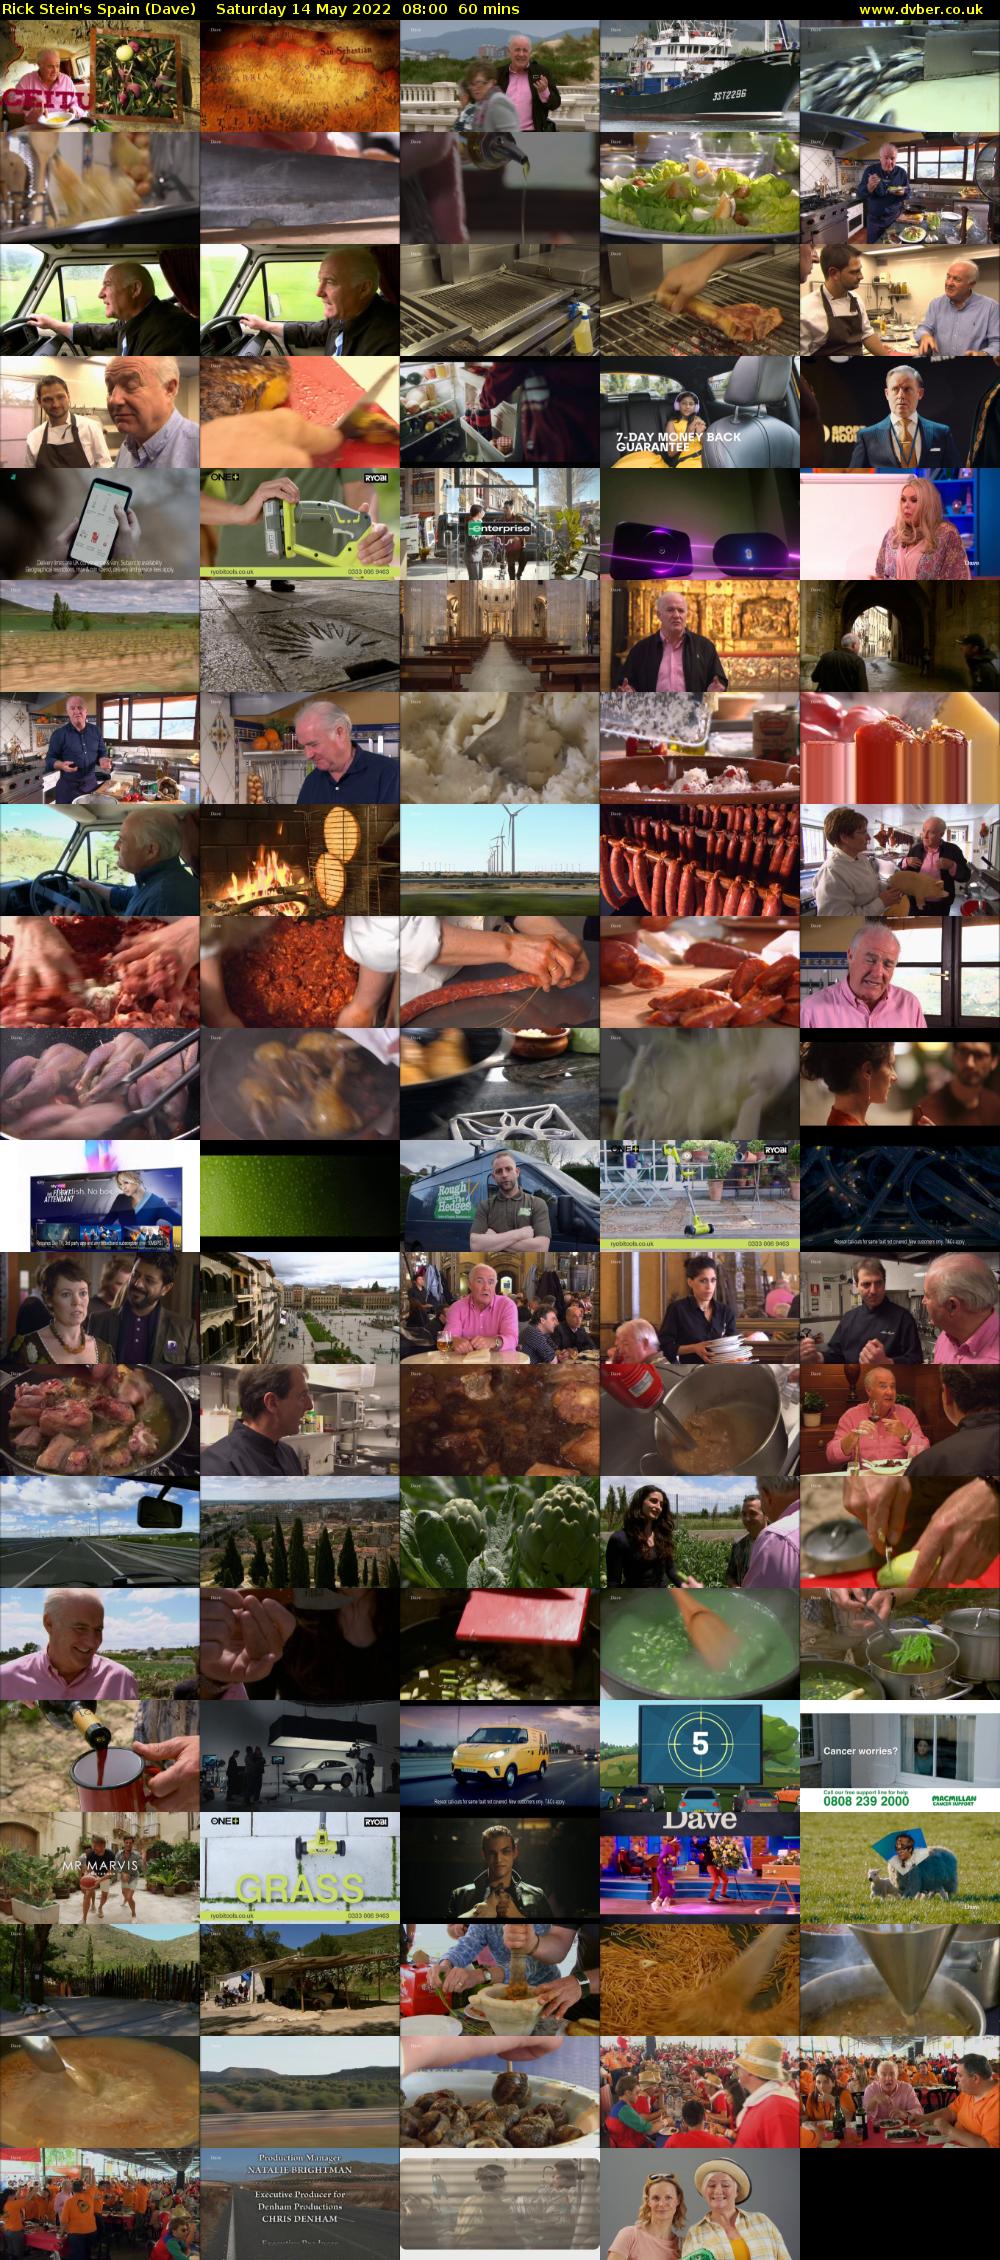 Rick Stein's Spain (Dave) Saturday 14 May 2022 08:00 - 09:00